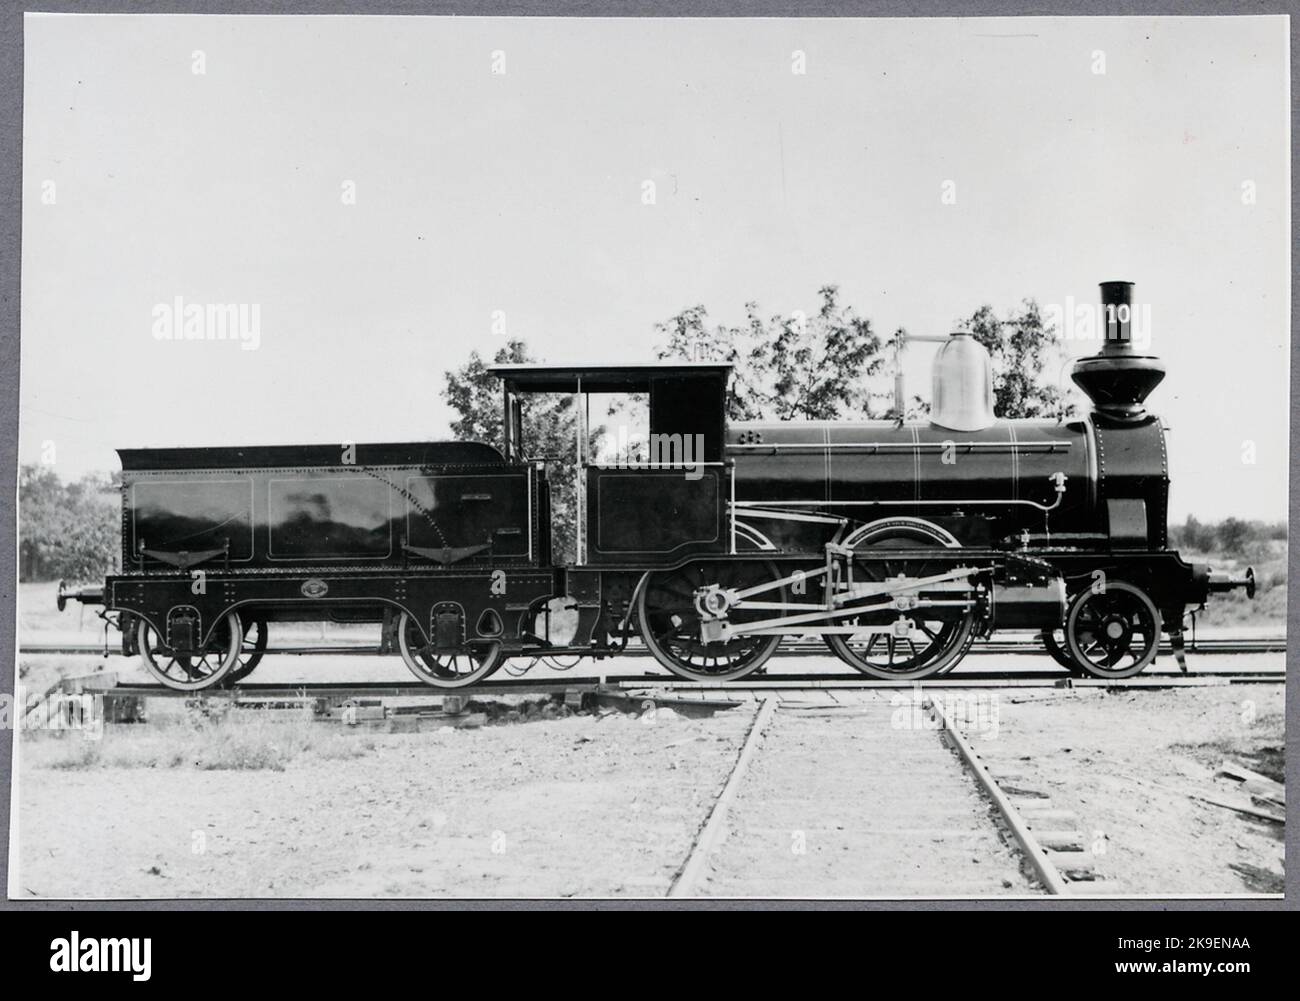 Delivery photo, Skåne Halaland Railway, Shj Lok 10 'Lagan', made in 1887 by Nohab. In 1896, the locomotive was sold to the State Railways and got Littera SJ VKBE 492. It was scrapped in 1928. Stock Photo